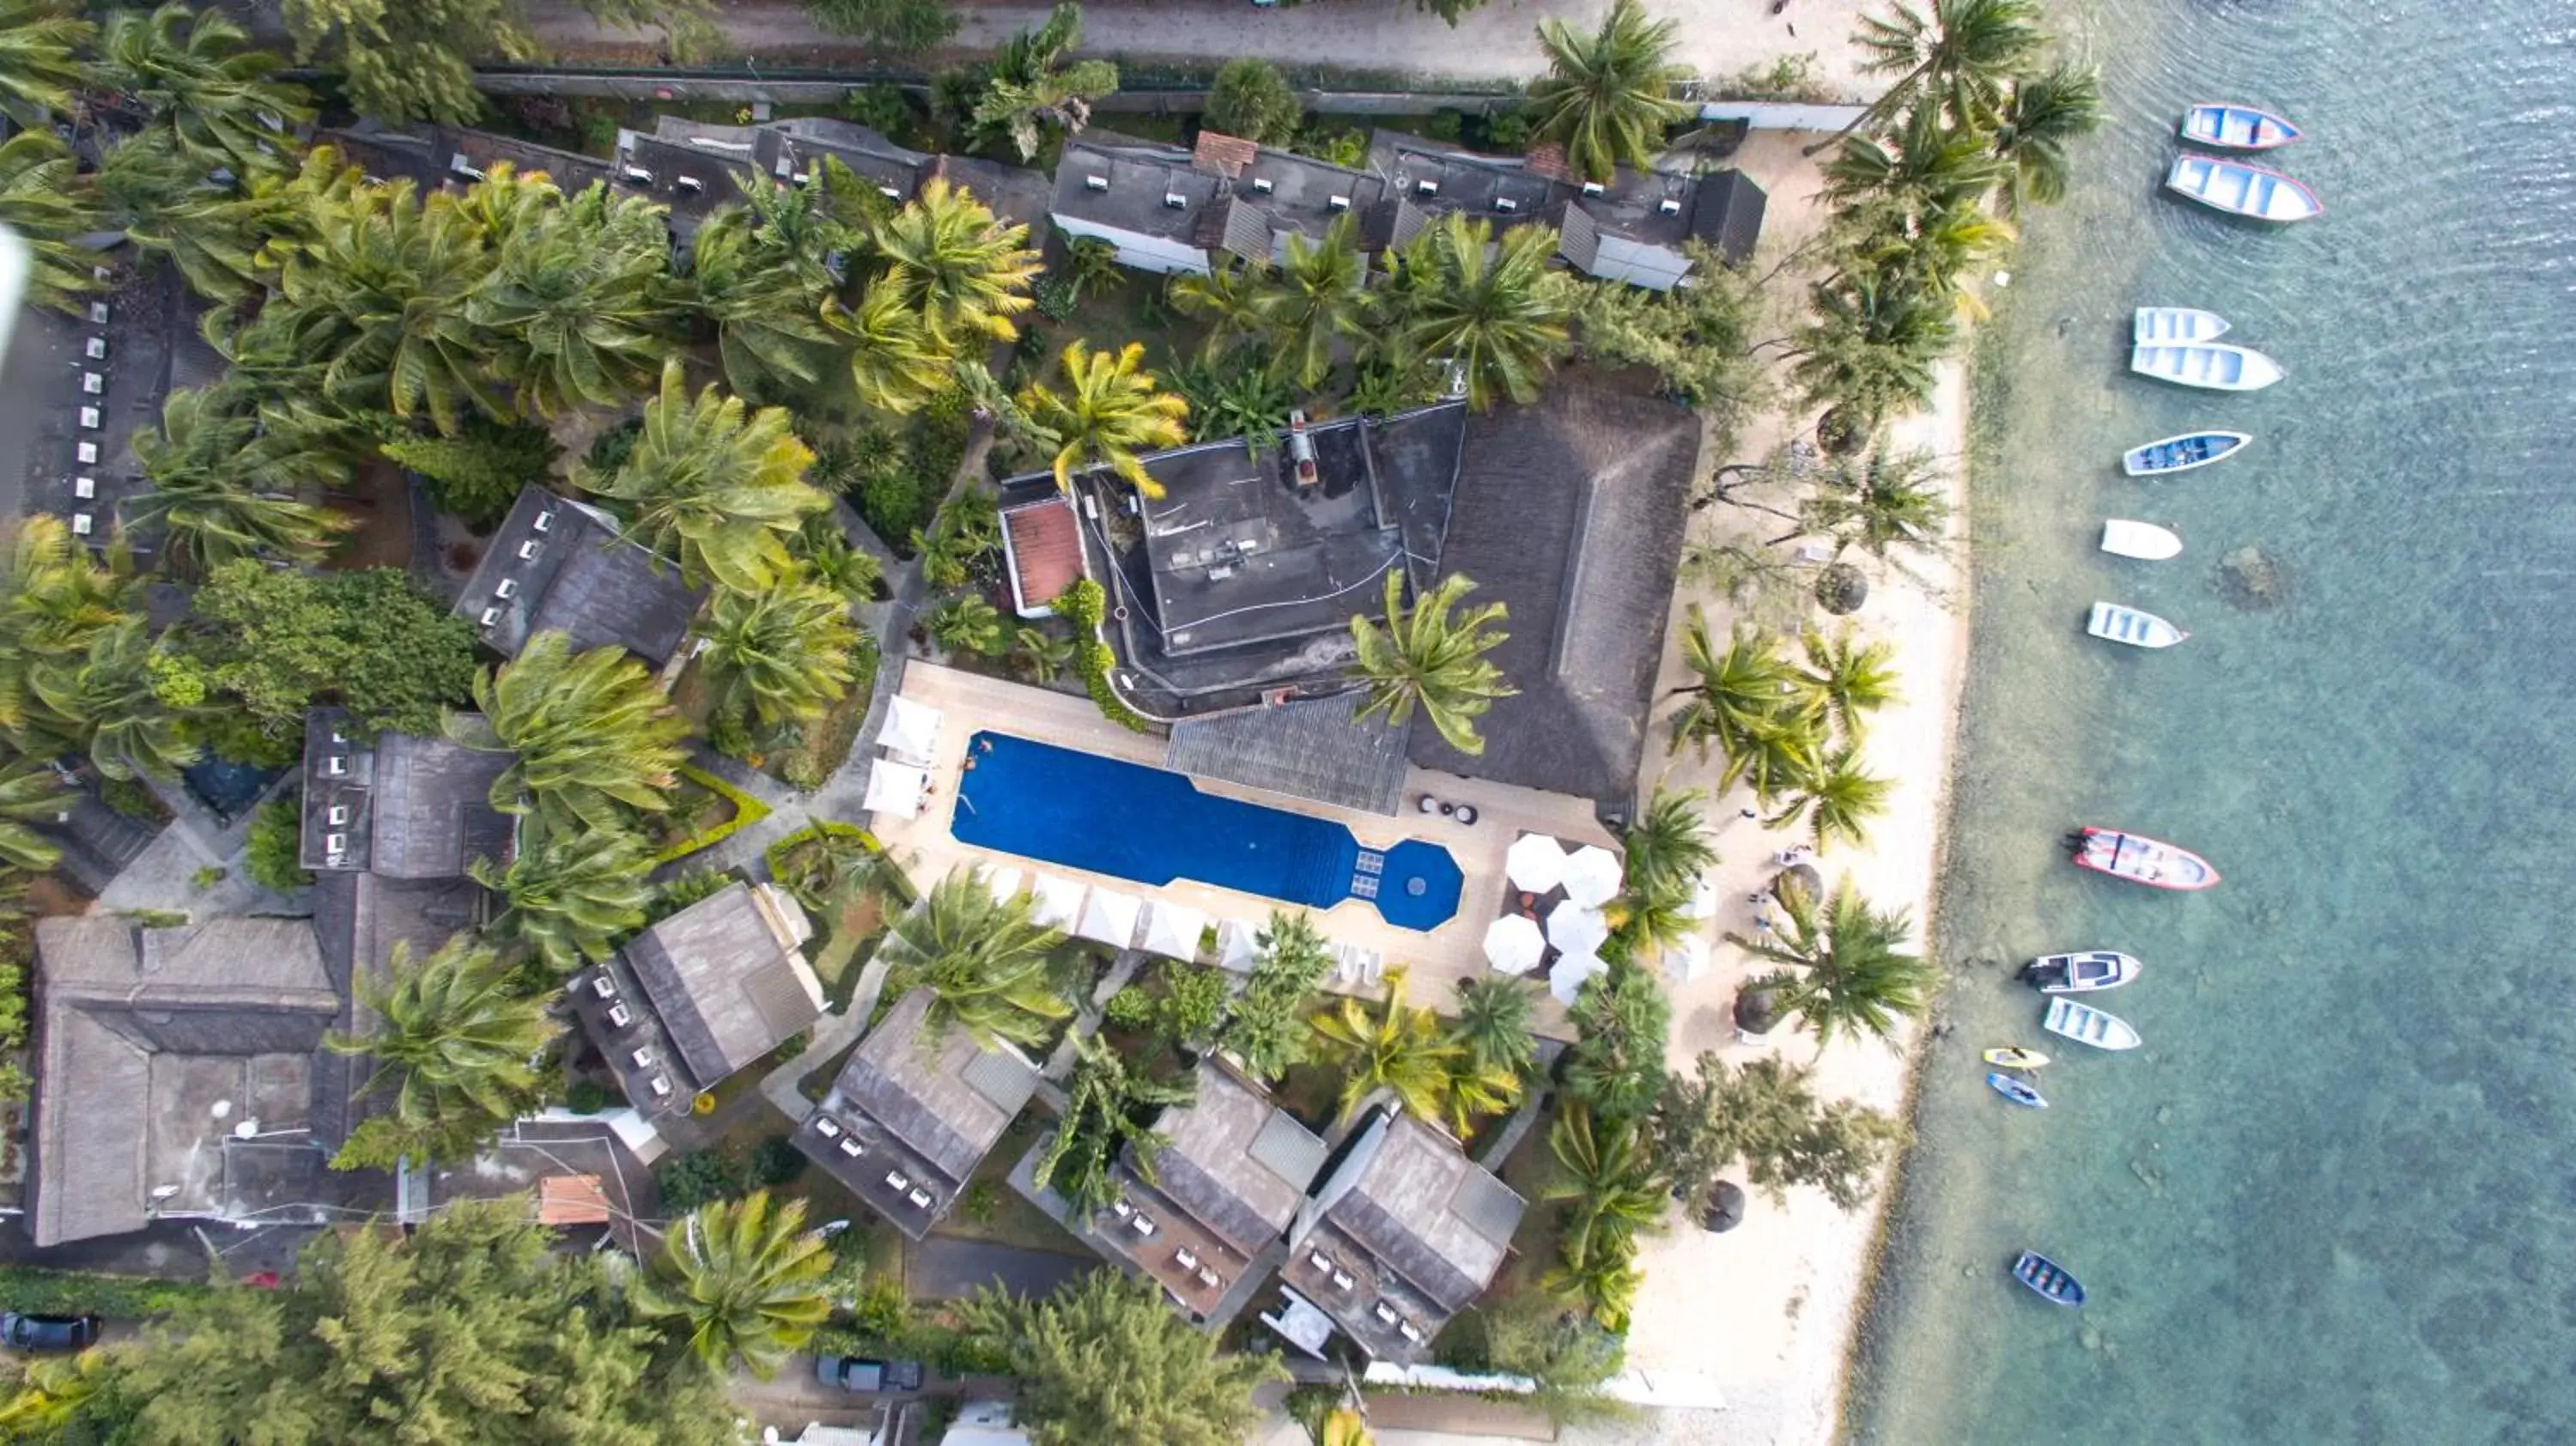 Property building, Bird's-eye View in Cocotiers Hotel – Mauritius